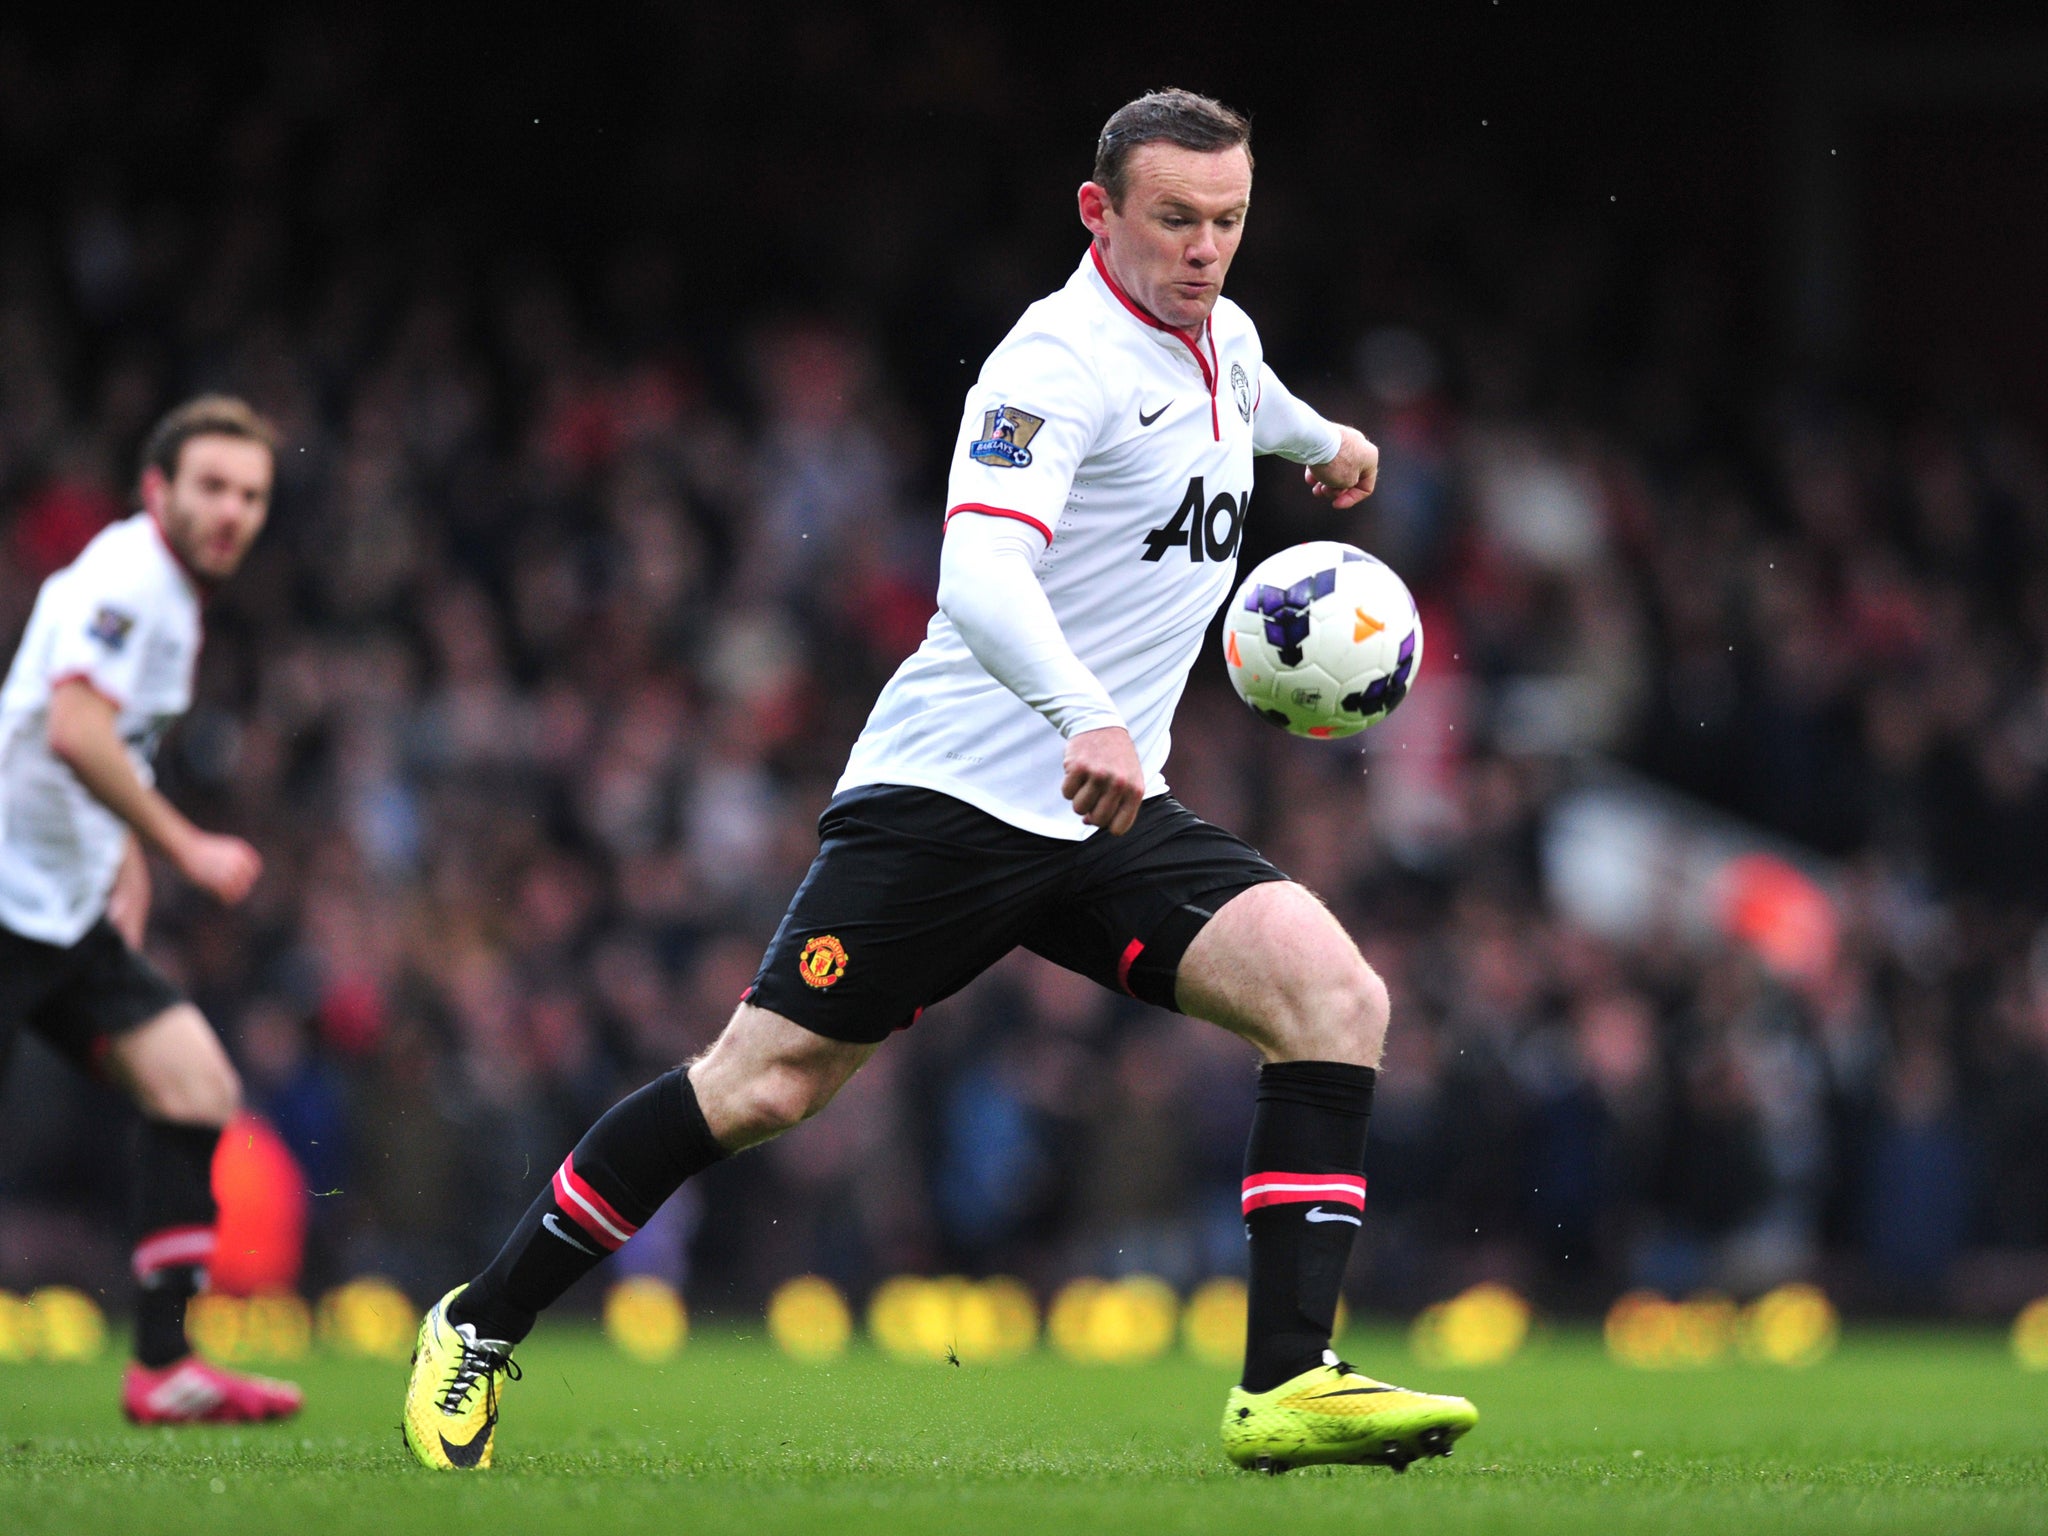 Wayne Rooney scores from 58 yards to put Manchester United 1-0 up against West Ham